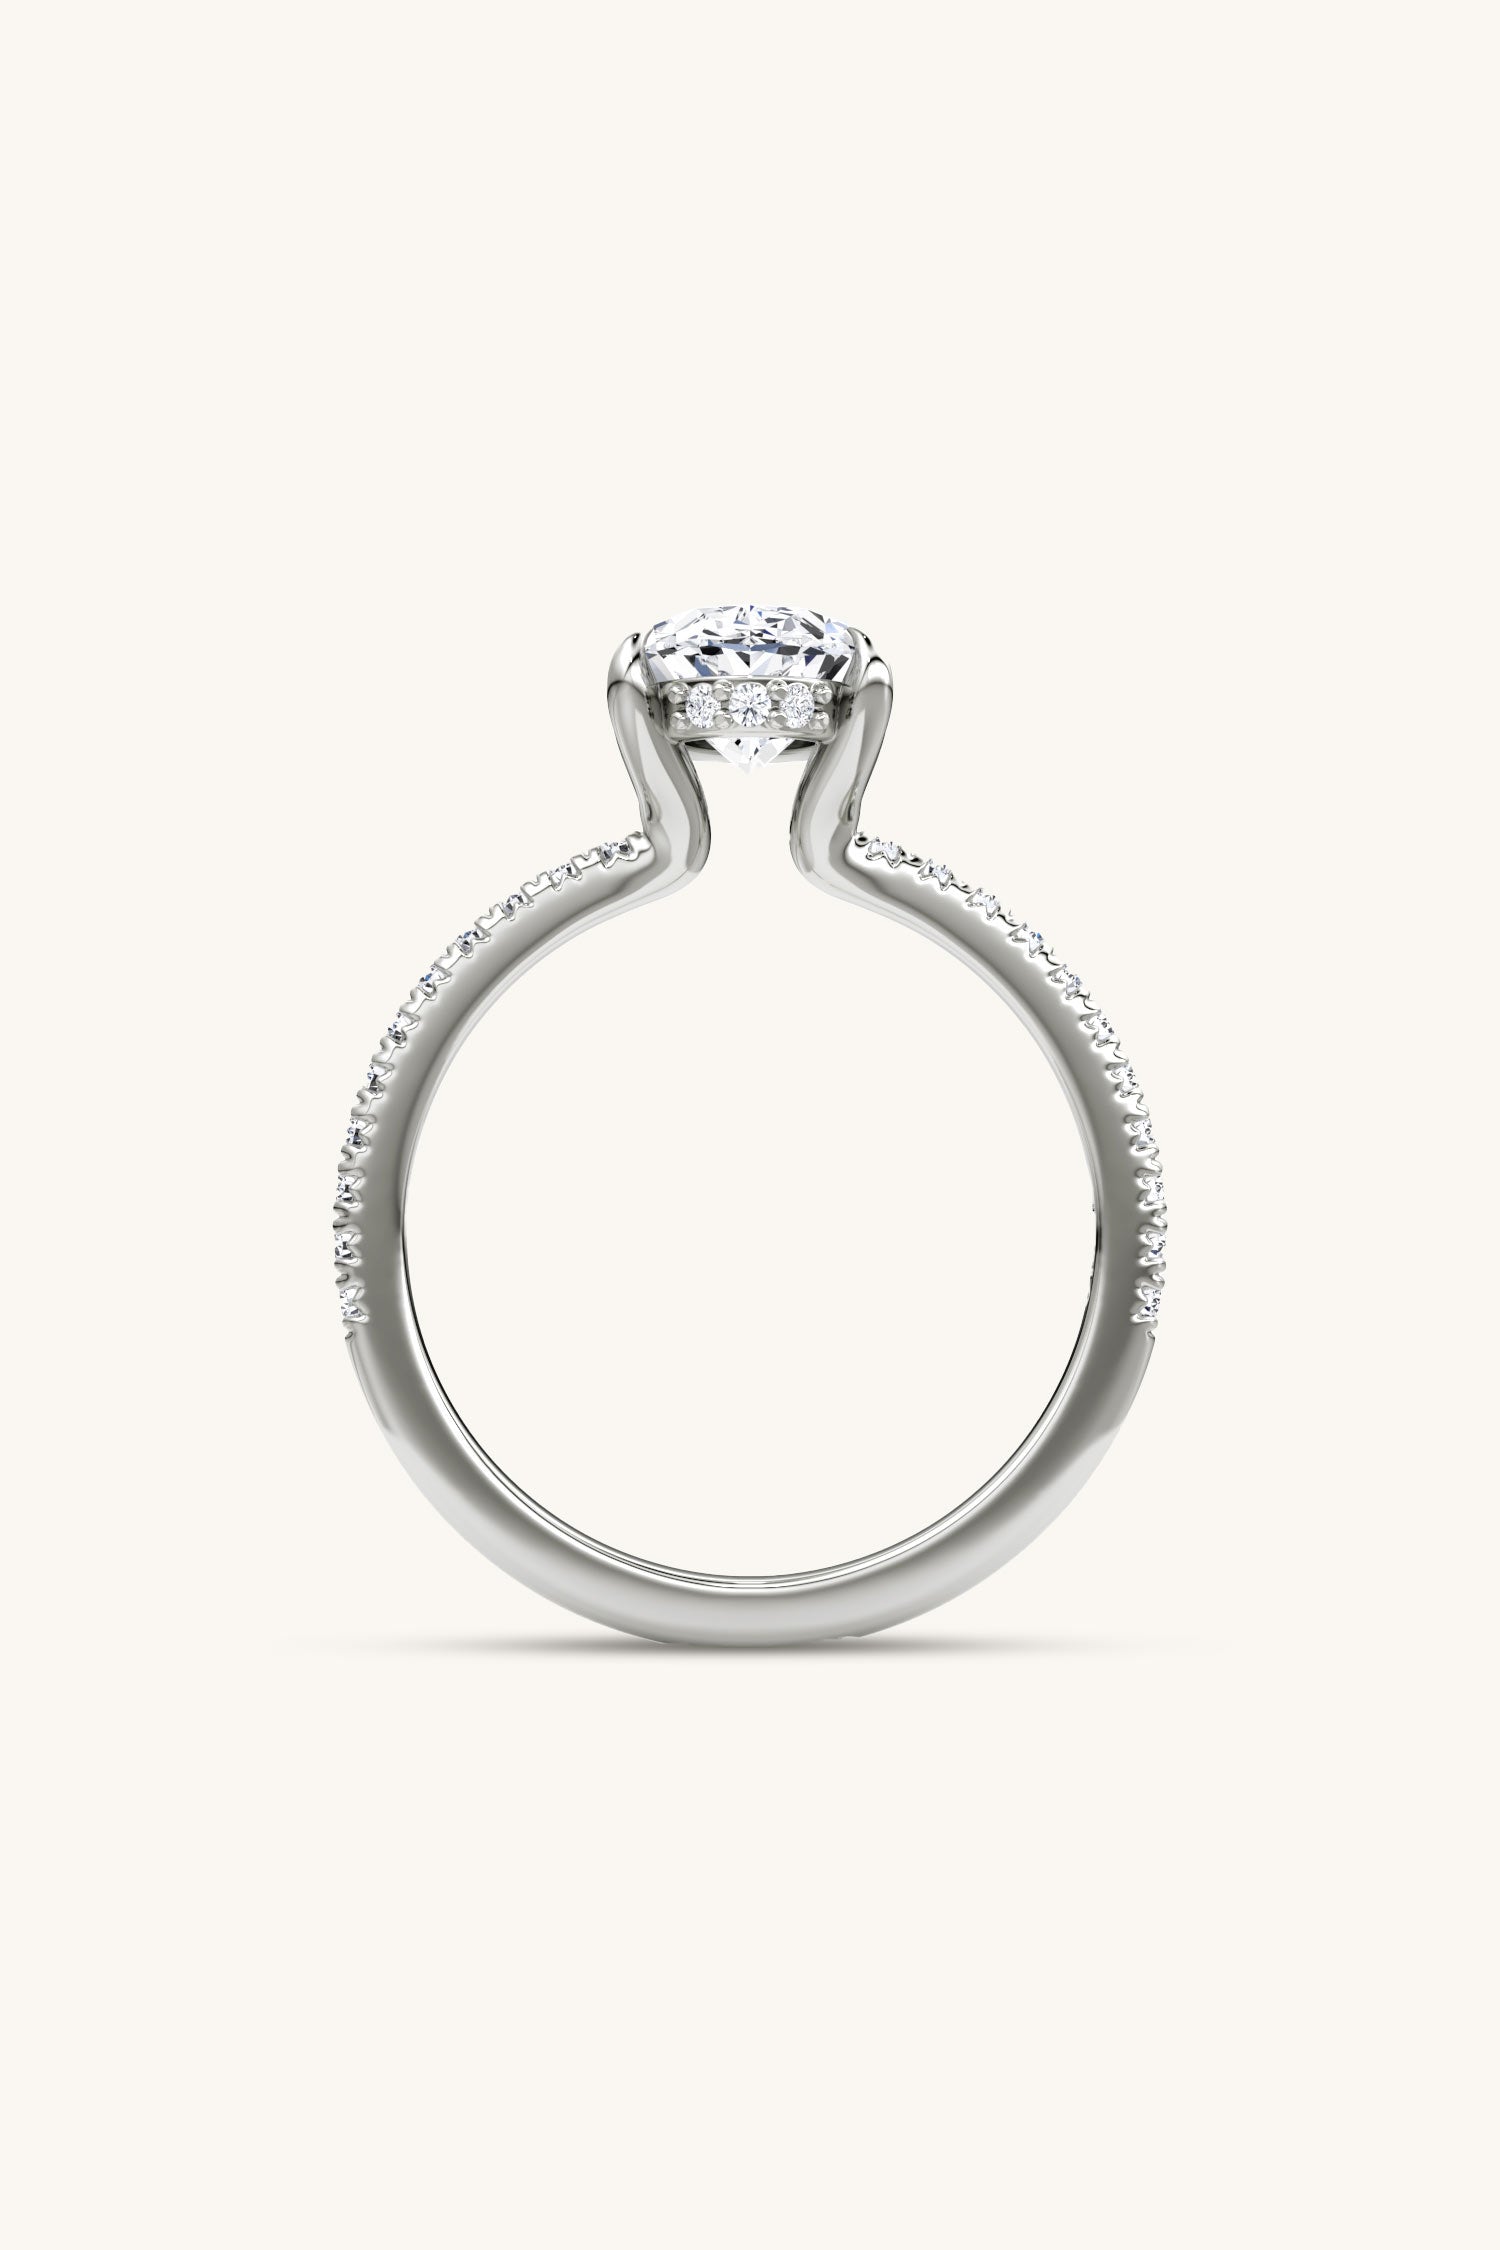 BICEPHAL MARQUISE SOLITAIRE PAVÉ RING